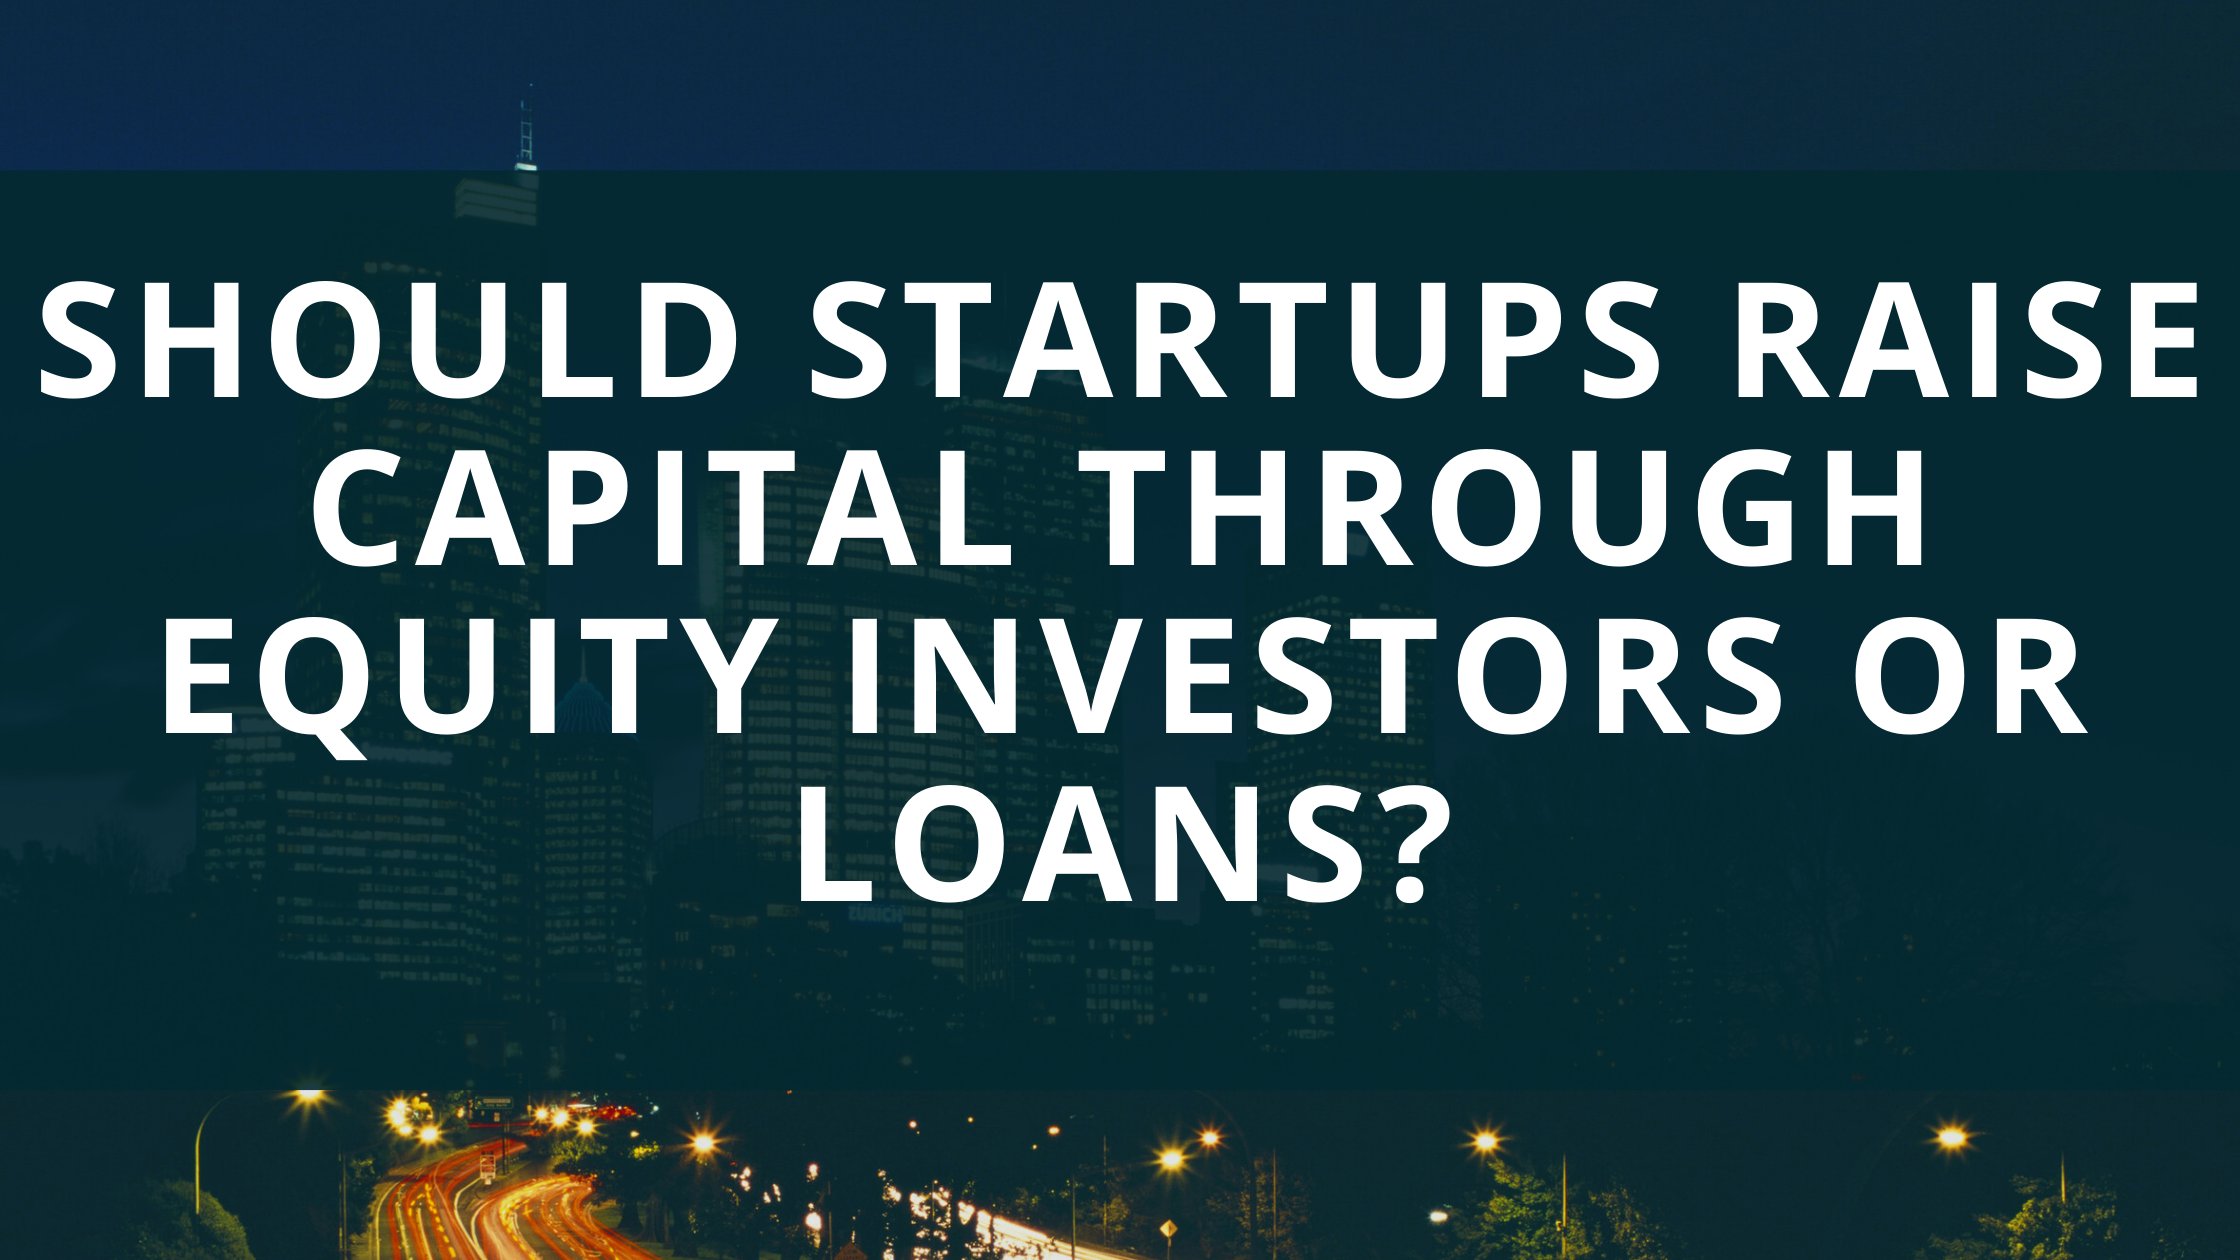 Should Startups Raise Capital Through Equity Investors or Loans?